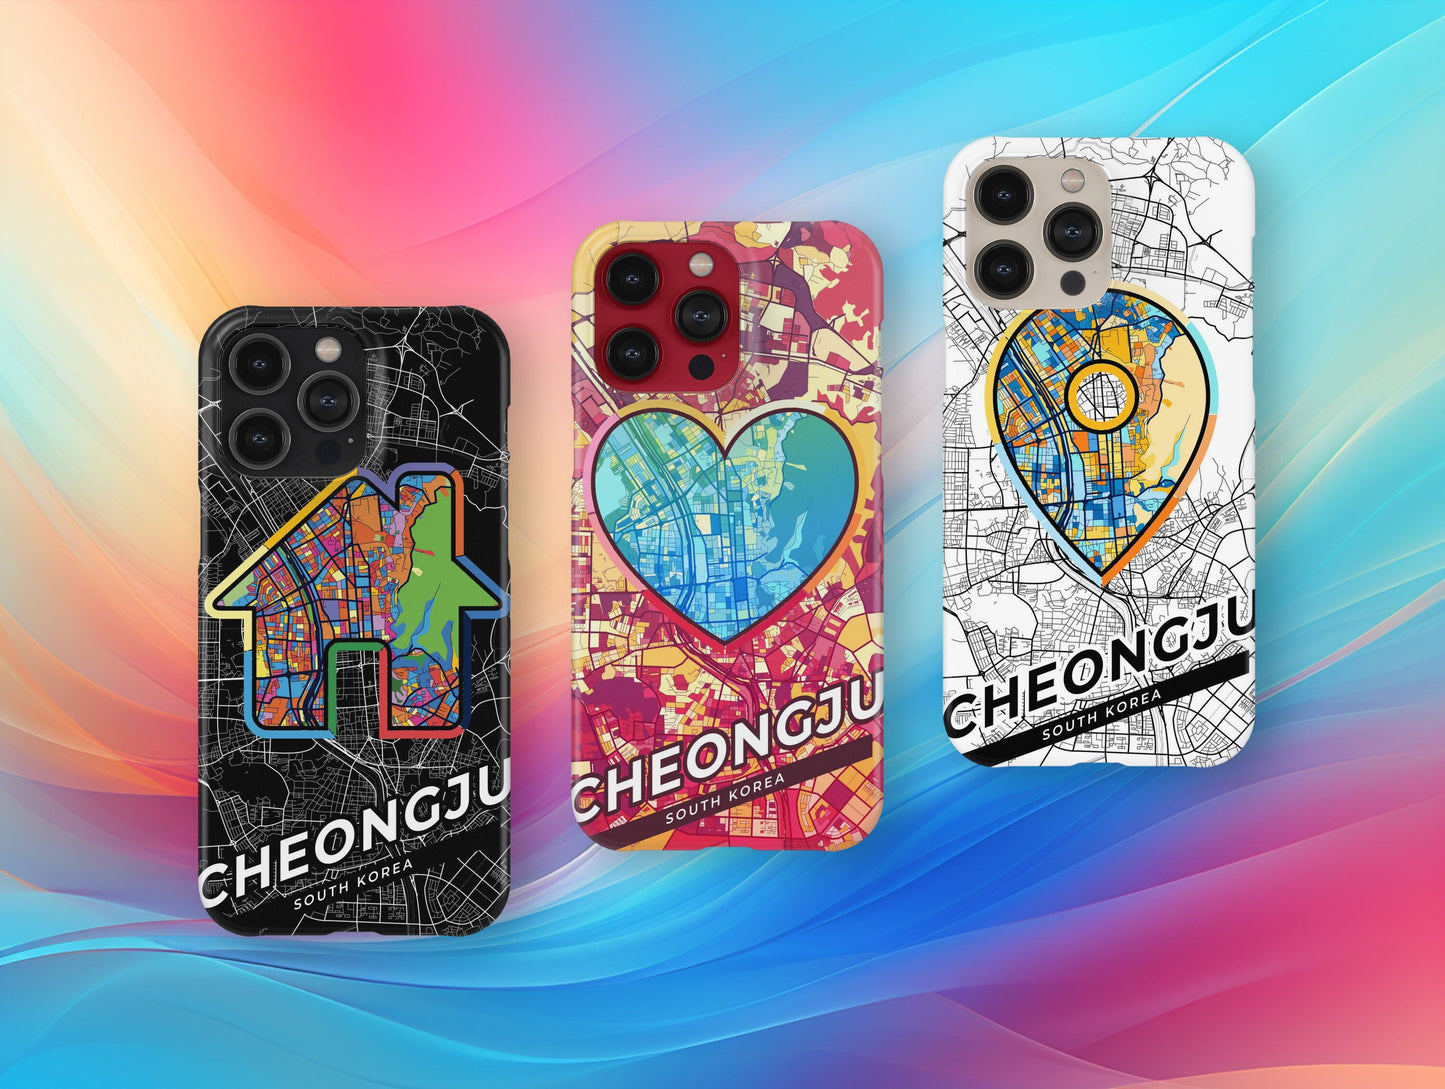 Cheongju South Korea slim phone case with colorful icon. Birthday, wedding or housewarming gift. Couple match cases.